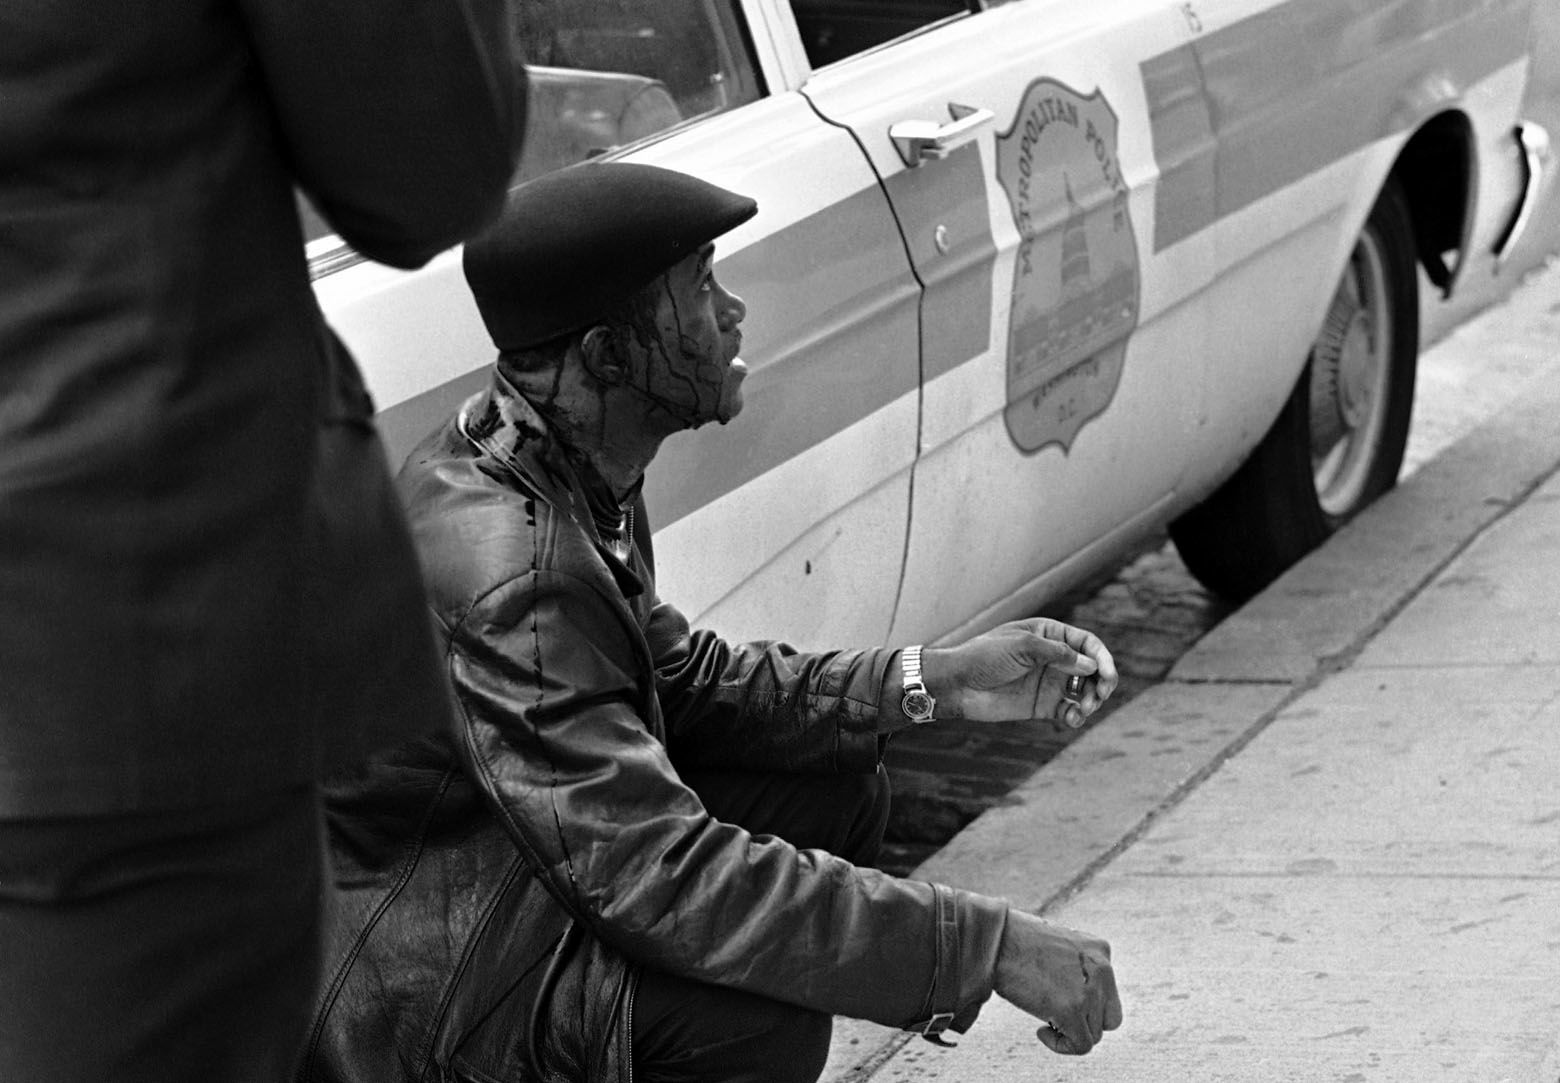 Man was arrested after police reported he fled a house, armed with a .22 caliber pistol, at 11th and K Streets, N.W., on April 7, 1968. He was taken into custody, the police reported, without any shots being fired. (AP Photo/Charles W. Harrity)